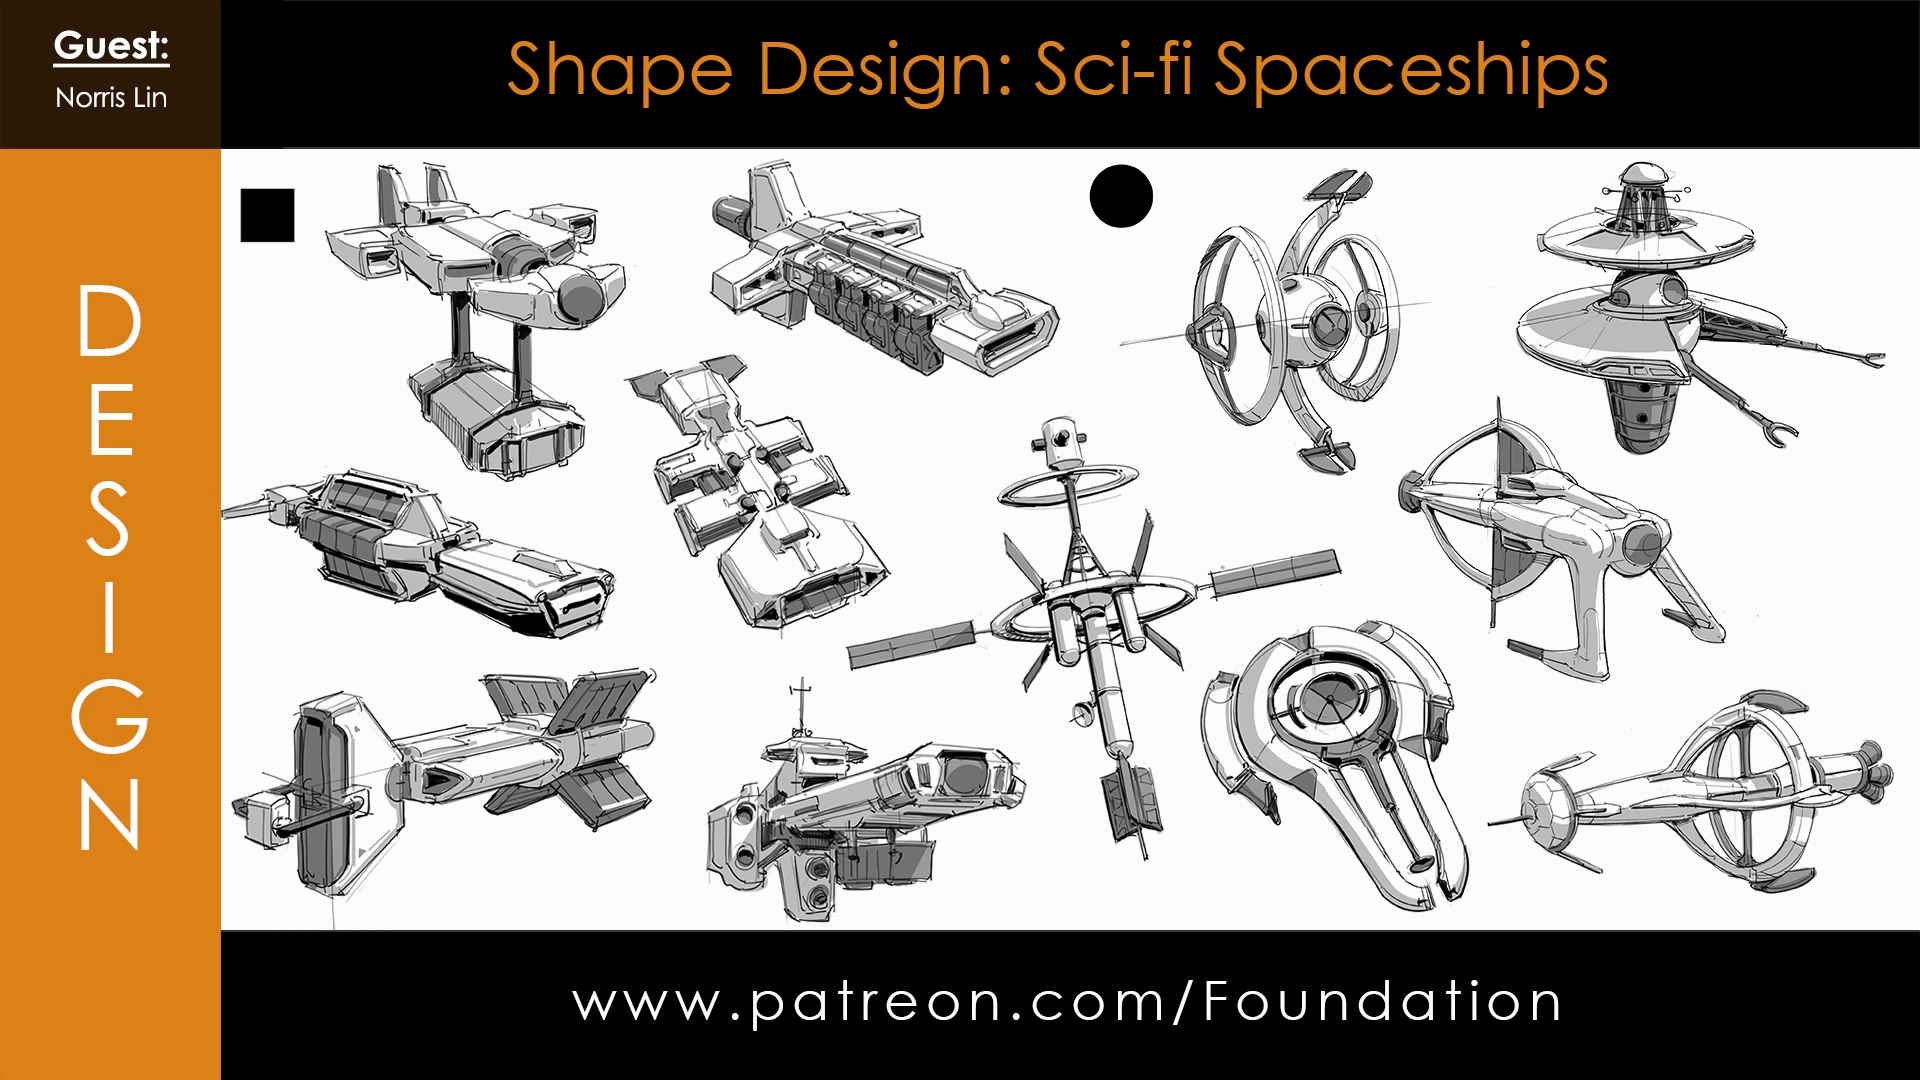 Shape Design – Sci-Fi Spaceships with Norris Lin